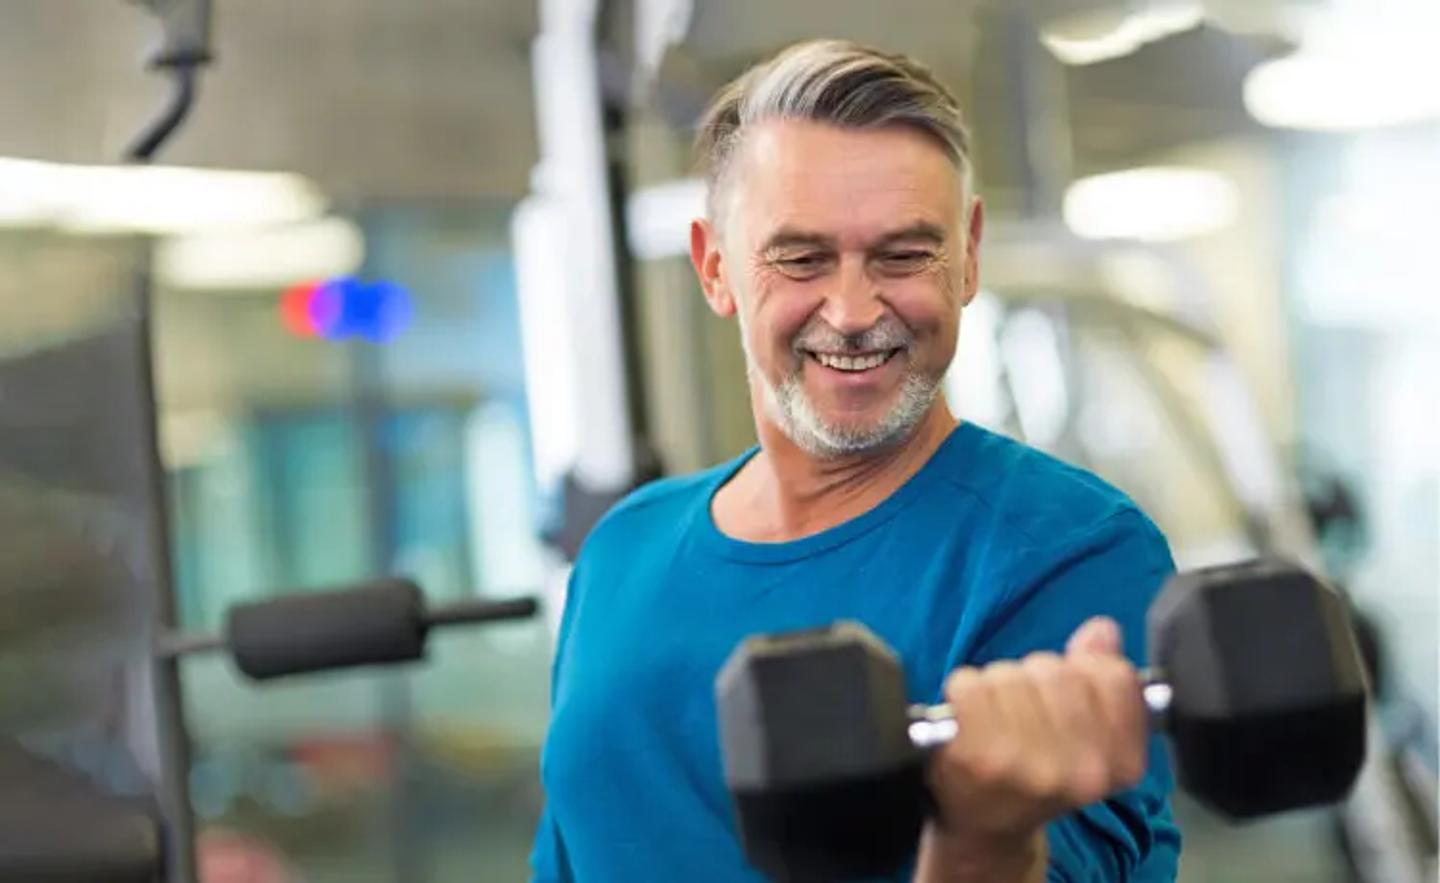 Older adult excited about improving their health through exercise. 